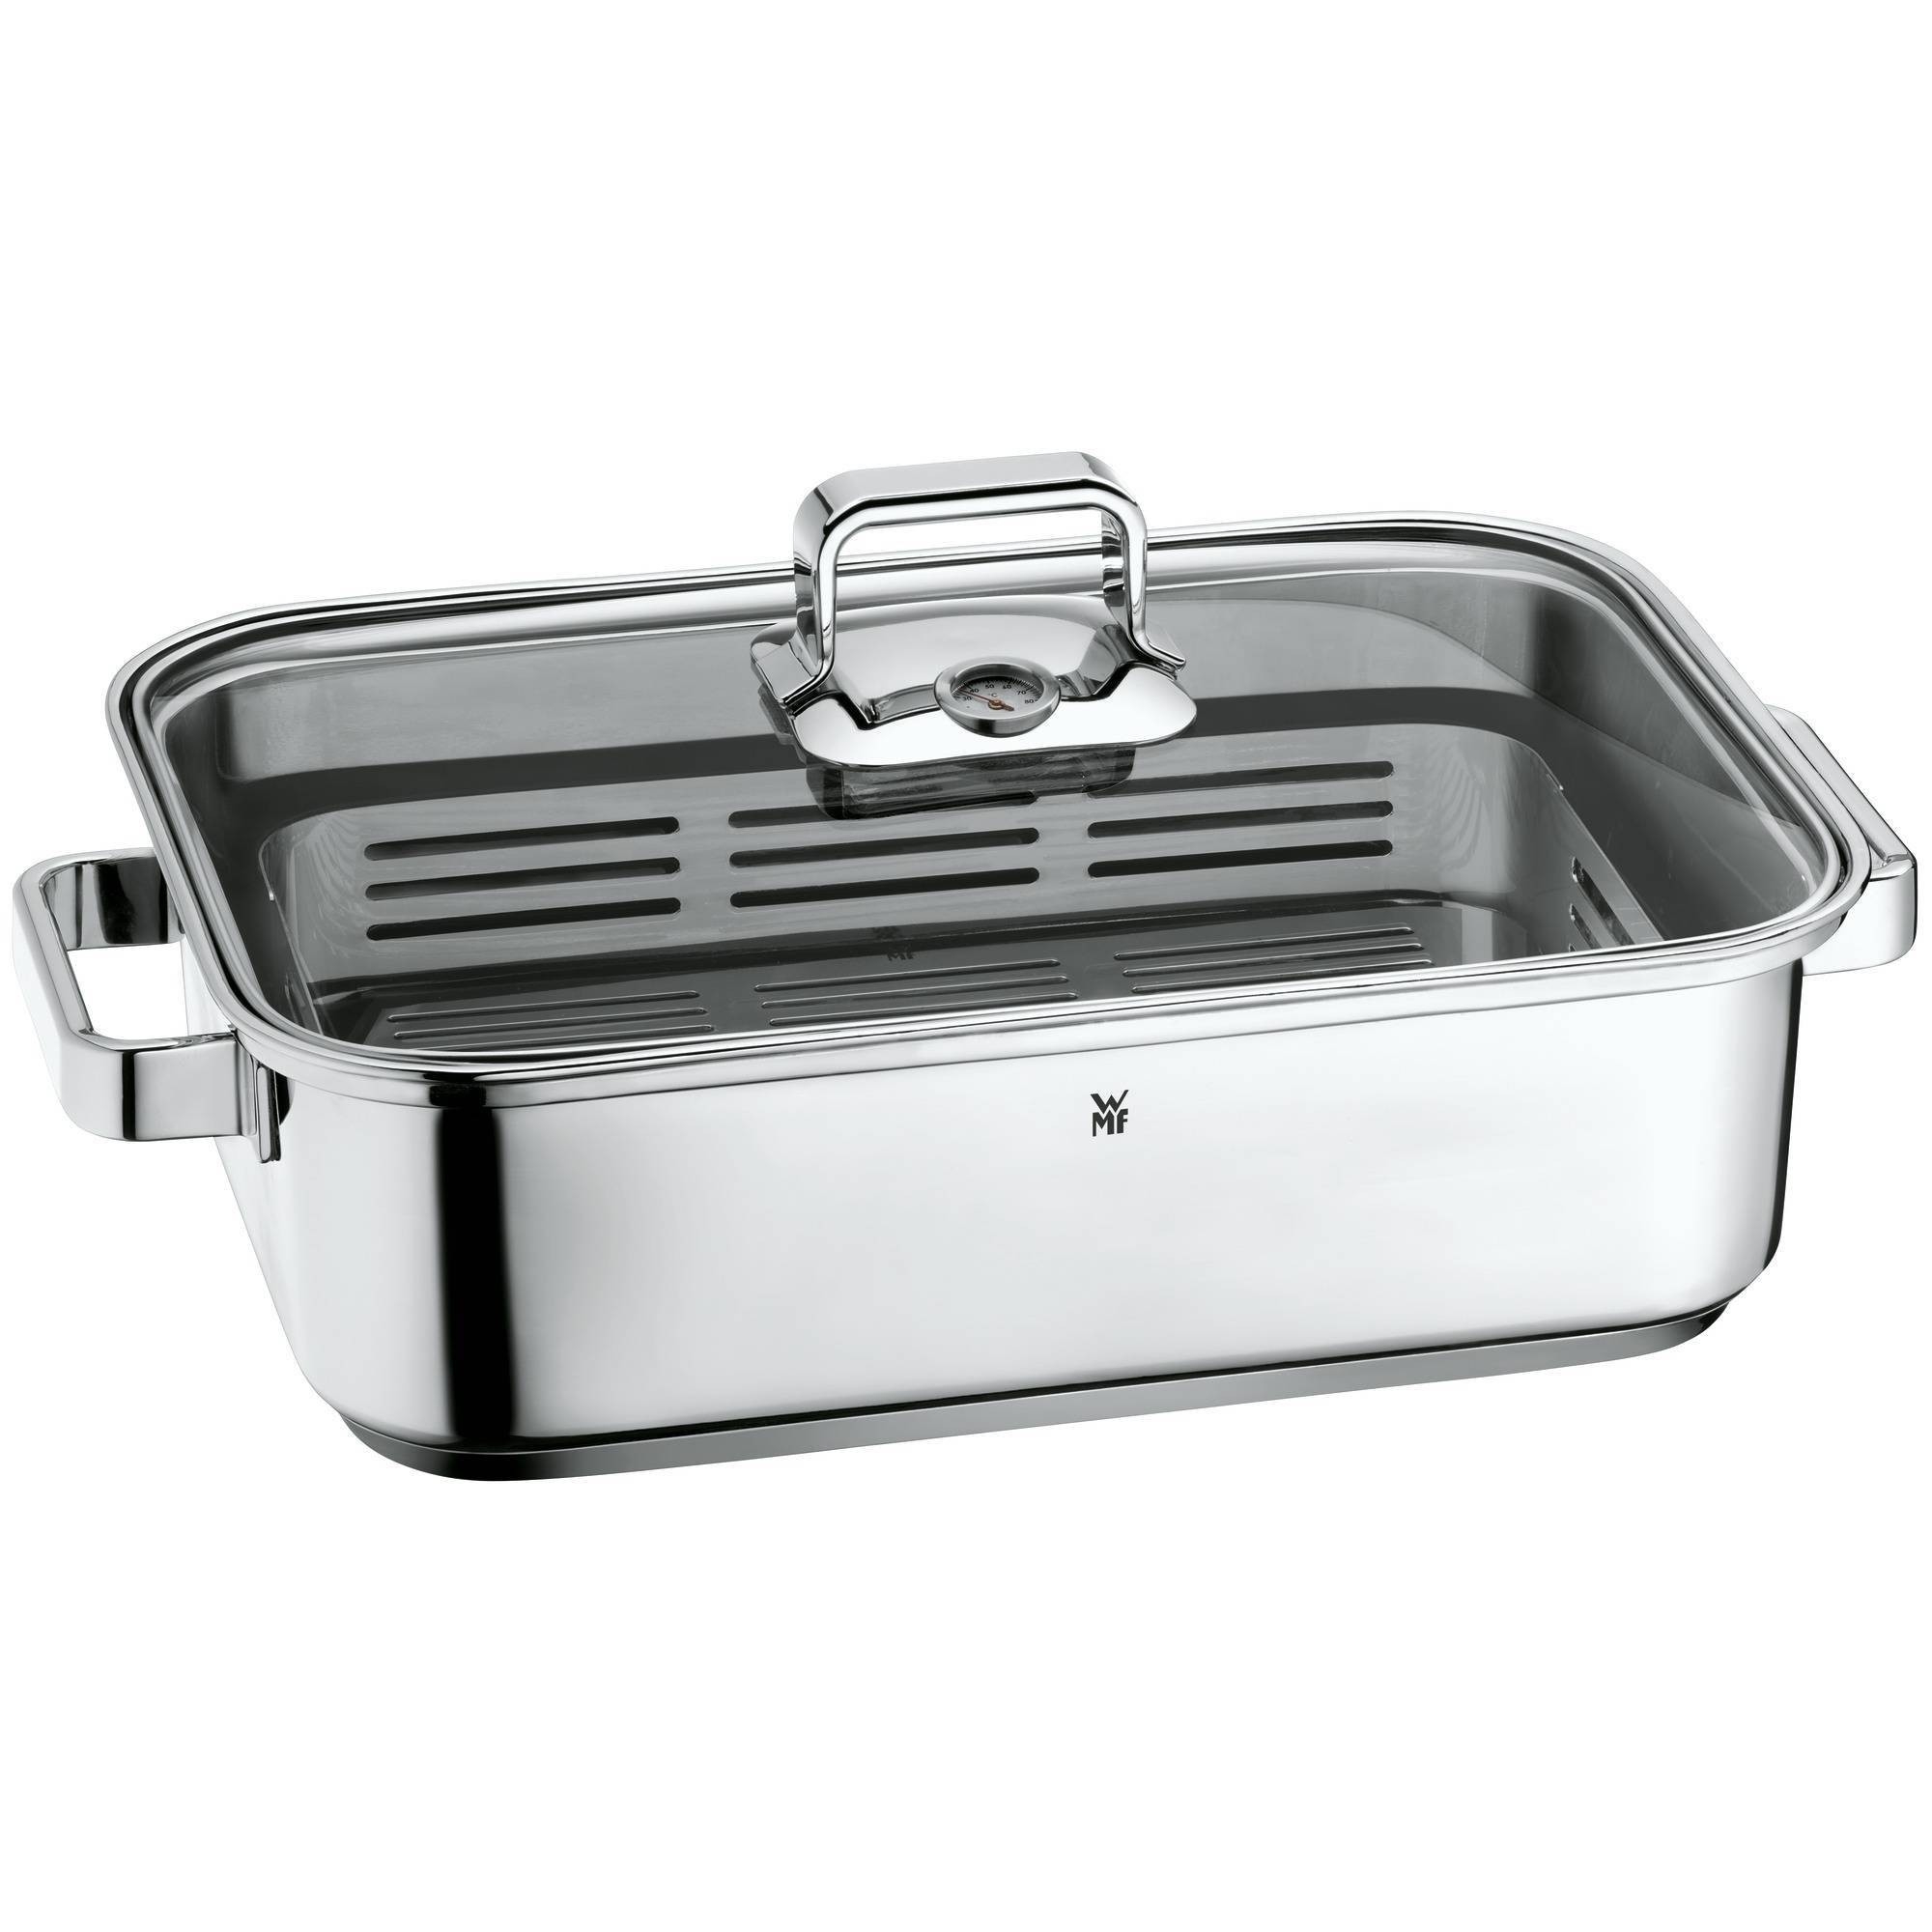 https://foter.com/photos/title/stainless-steel-roasting-pan-with-lid.jpg